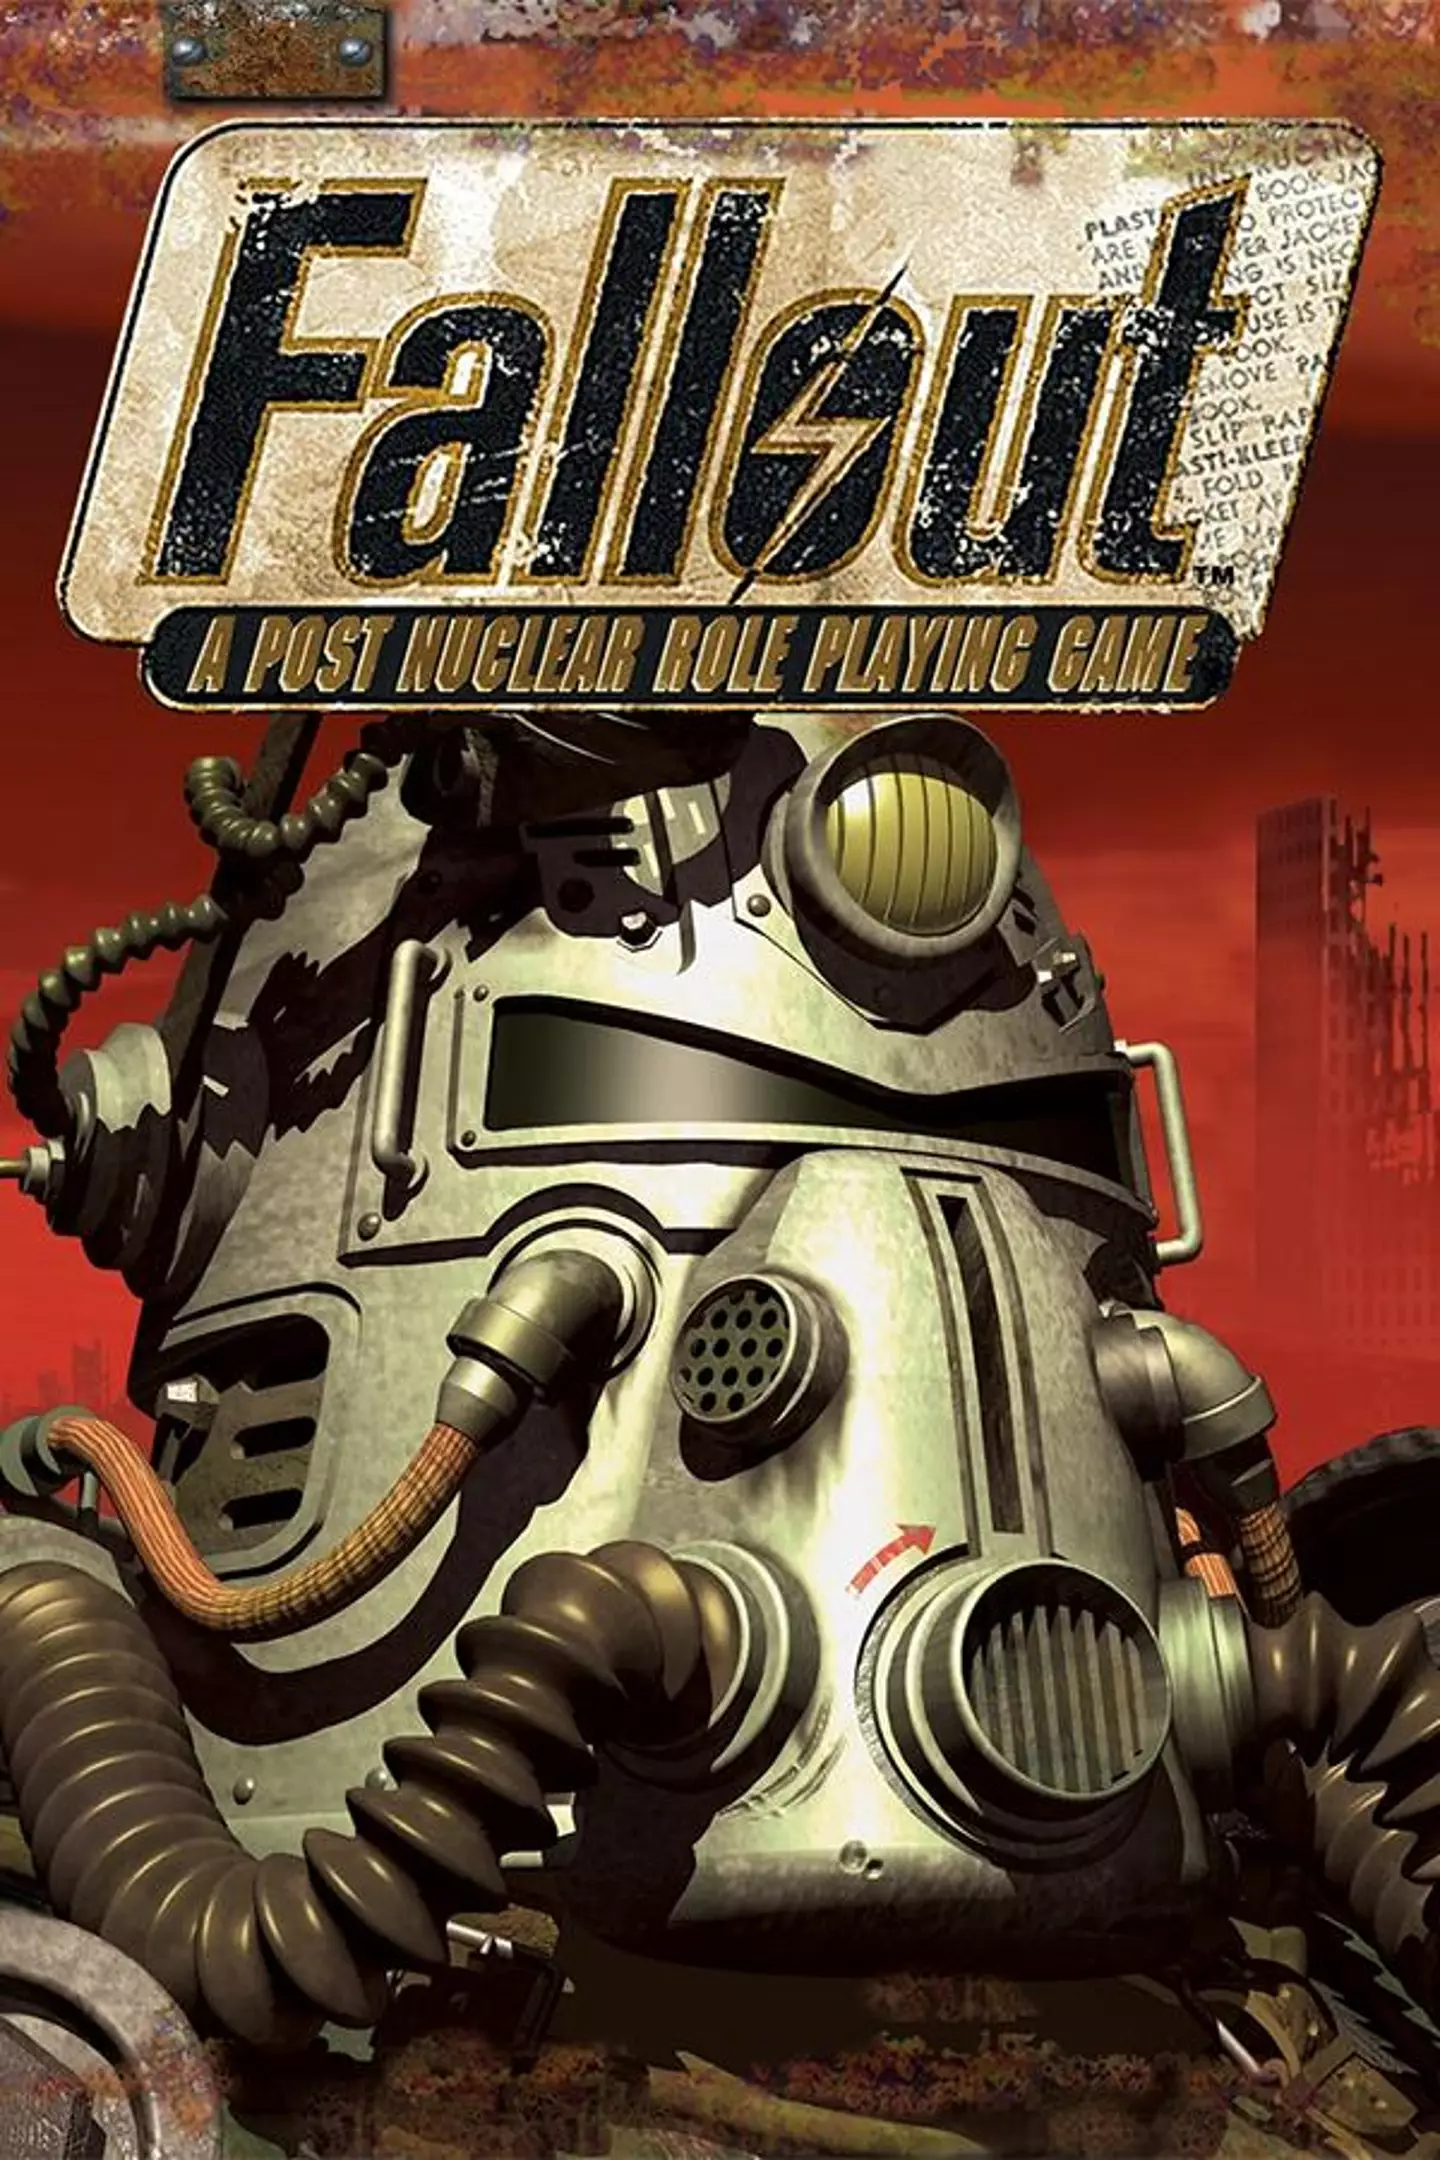 The original Fallout is free on Prime Gaming.